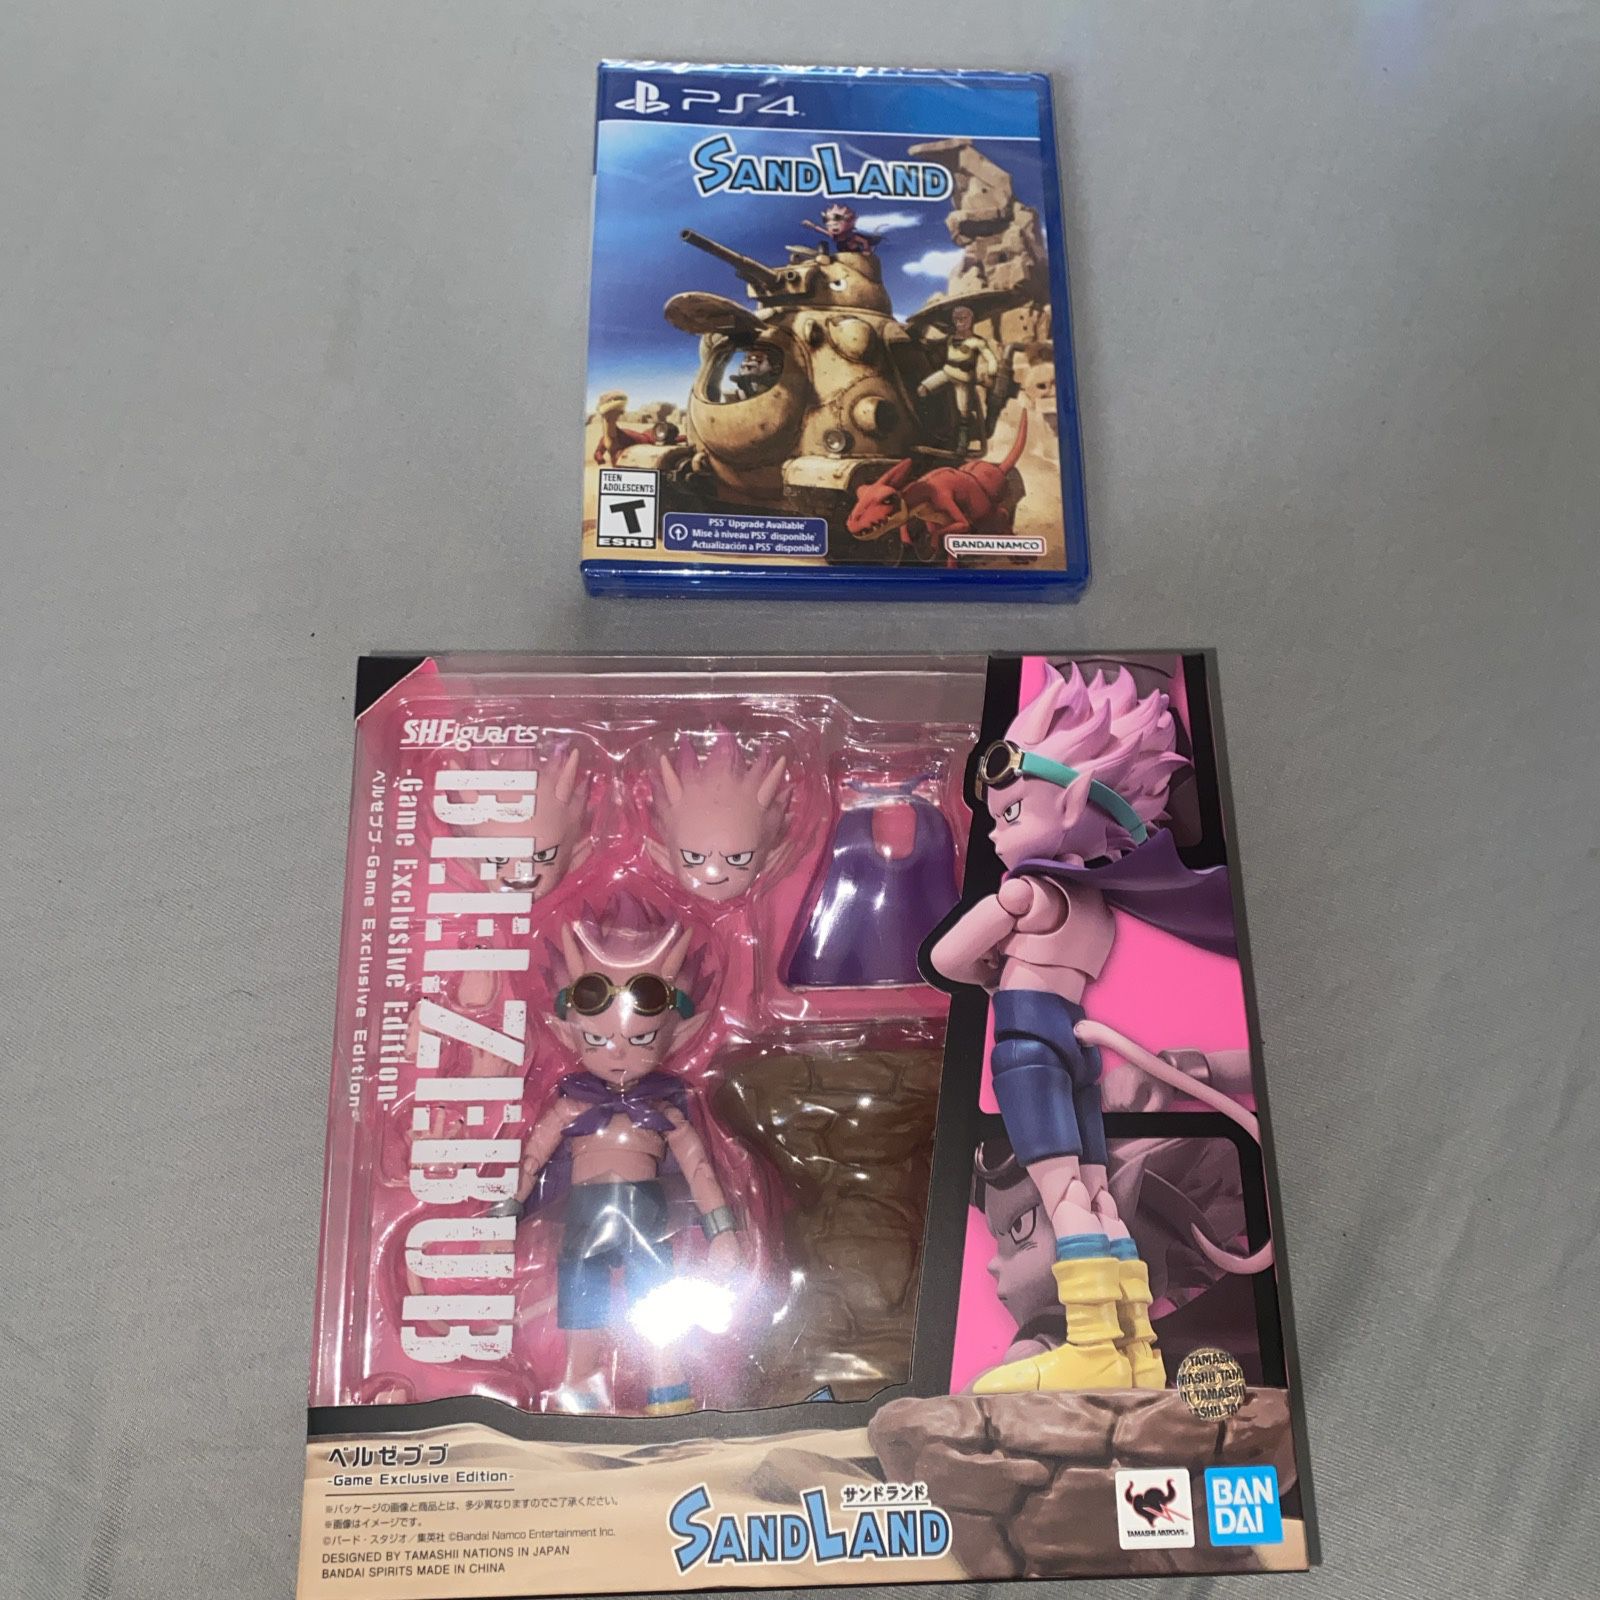 New Unopened Sand Land - Sony PlayStation 5 Collectors Edition Pre Order Bonus   I send you the code after you receive the package and payment clears 